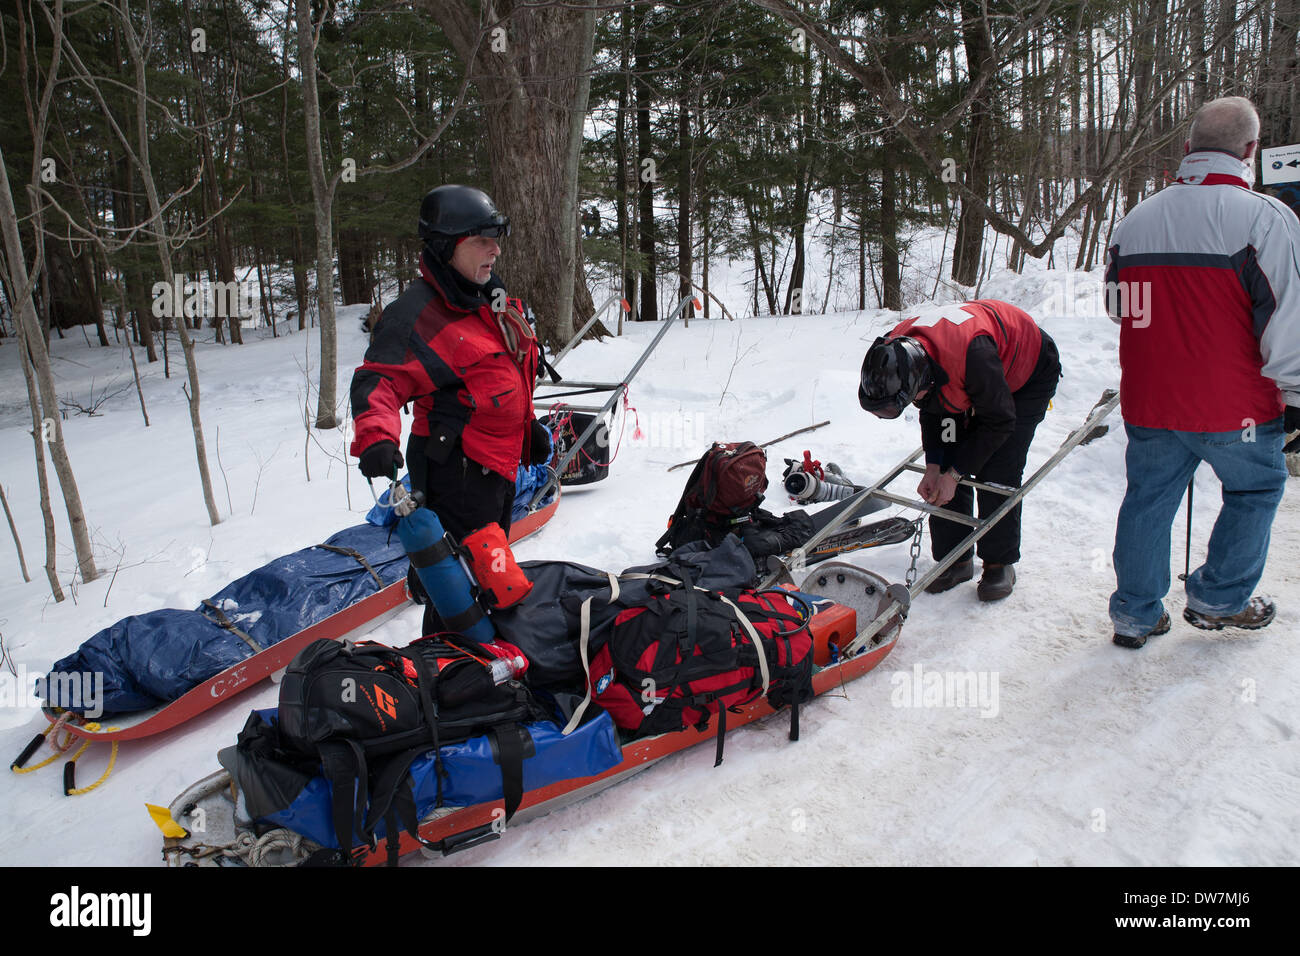 Two members of the Thunderbolt Ski Patrol check their pull sleds after the Annual Thunderbolt Ski Run in Adams MA. Stock Photo